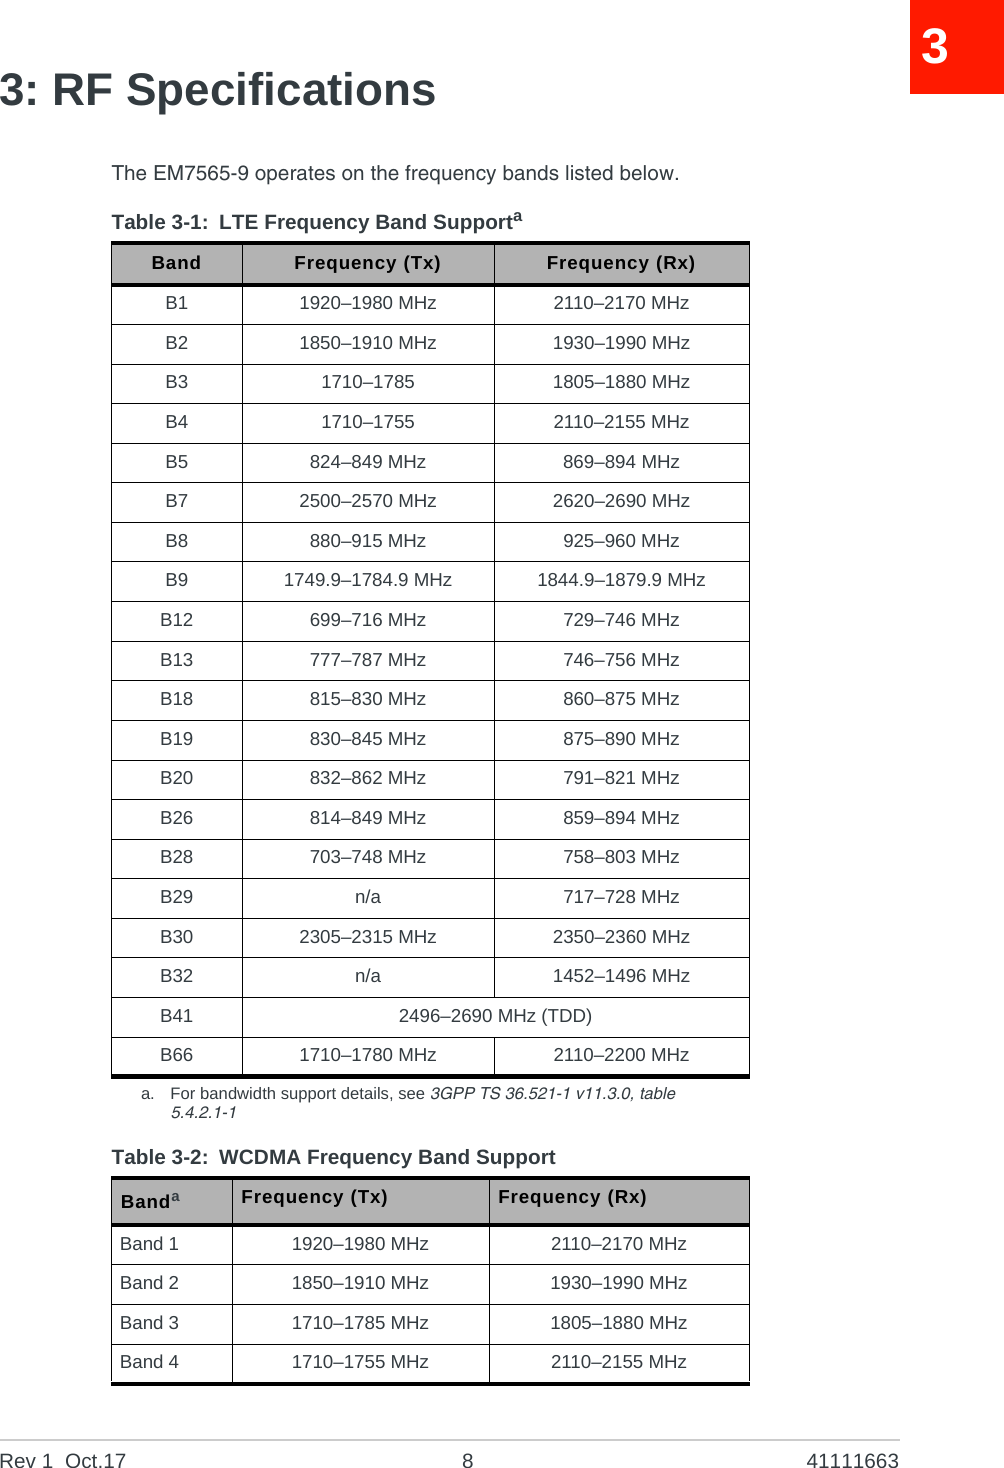 Rev 1  Oct.17 8 4111166333: RF SpecificationsThe EM7565-9 operates on the frequency bands listed below.Table 3-1: LTE Frequency Band Supportaa. For bandwidth support details, see 3GPP TS 36.521-1 v11.3.0, table 5.4.2.1-1Band Frequency (Tx) Frequency (Rx)B1 1920–1980 MHz 2110–2170 MHzB2 1850–1910 MHz 1930–1990 MHzB3 1710–1785 1805–1880 MHzB4 1710–1755 2110–2155 MHzB5 824–849 MHz 869–894 MHzB7 2500–2570 MHz 2620–2690 MHzB8 880–915 MHz 925–960 MHzB9 1749.9–1784.9 MHz 1844.9–1879.9 MHzB12 699–716 MHz 729–746 MHzB13 777–787 MHz 746–756 MHzB18 815–830 MHz 860–875 MHzB19 830–845 MHz 875–890 MHzB20 832–862 MHz 791–821 MHzB26 814–849 MHz 859–894 MHzB28 703–748 MHz 758–803 MHzB29 n/a 717–728 MHzB30 2305–2315 MHz 2350–2360 MHzB32 n/a 1452–1496 MHzB41 2496–2690 MHz (TDD)B66 1710–1780 MHz 2110–2200 MHzTable 3-2: WCDMA Frequency Band SupportBandaFrequency (Tx) Frequency (Rx)Band 1 1920–1980 MHz 2110–2170 MHzBand 2 1850–1910 MHz 1930–1990 MHzBand 3 1710–1785 MHz 1805–1880 MHzBand 4 1710–1755 MHz 2110–2155 MHz